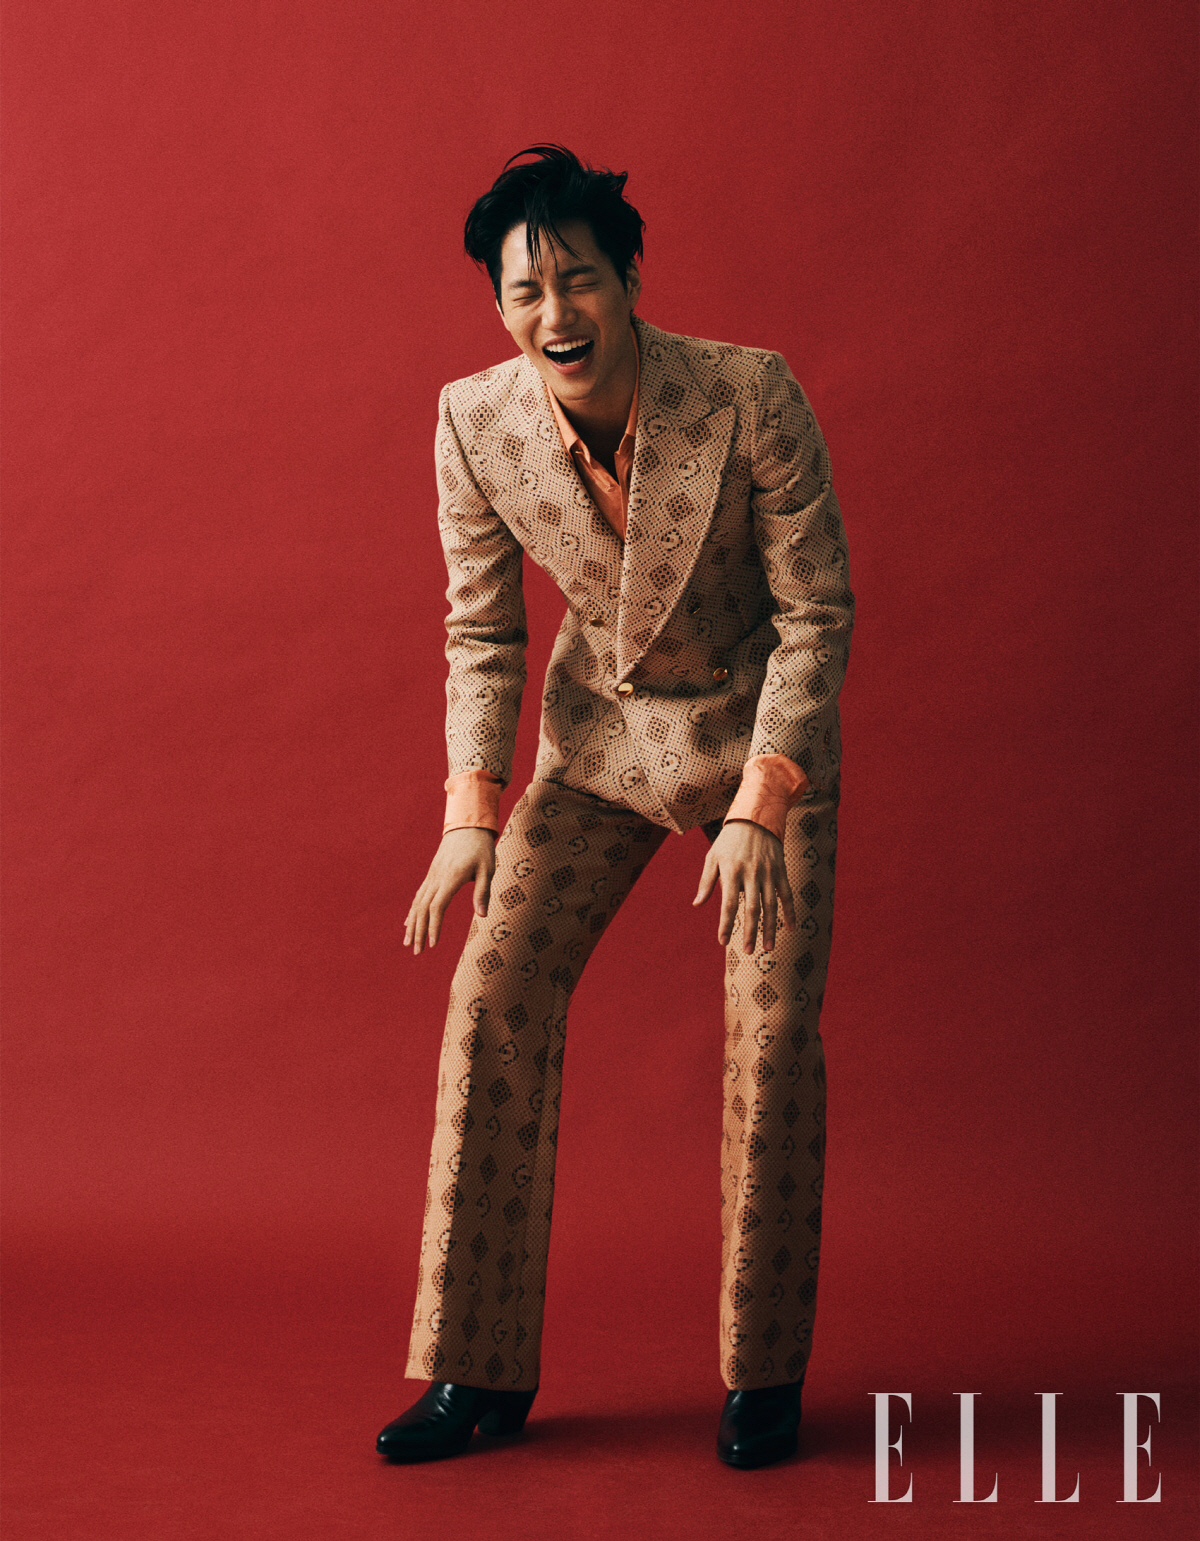 The Italian luxury brand Gucci has released a fashion picture with EXO Kai in the April issue of Elle Korea.Kai, who covered the cover of the April issue of Elle Korea, presented the Gucci 2020 spring summer collection with his own unique style with various poses.Kai features a 2020 spring summer collection look, including a jersey jacket with stitch detailing, vintage tricotine pants, RED color flare wool coats, margarine-orange-multicolor psychedelic G jackets and pants.Here, the RED color Gucci 1955 Holsbit Small Top Handle Bag, black leather brush booty, oversized frame sunglasses, and GG pattern silk tie are combined to add points.All of the costumes worn by Kai are available at the Gucci National Store and the official online store.Meanwhile, Kai is not only attracting worldwide attention as a global campaign model for Gucci Eyewear, but continues to engage in Guccis official activities as an ambassador for the house.